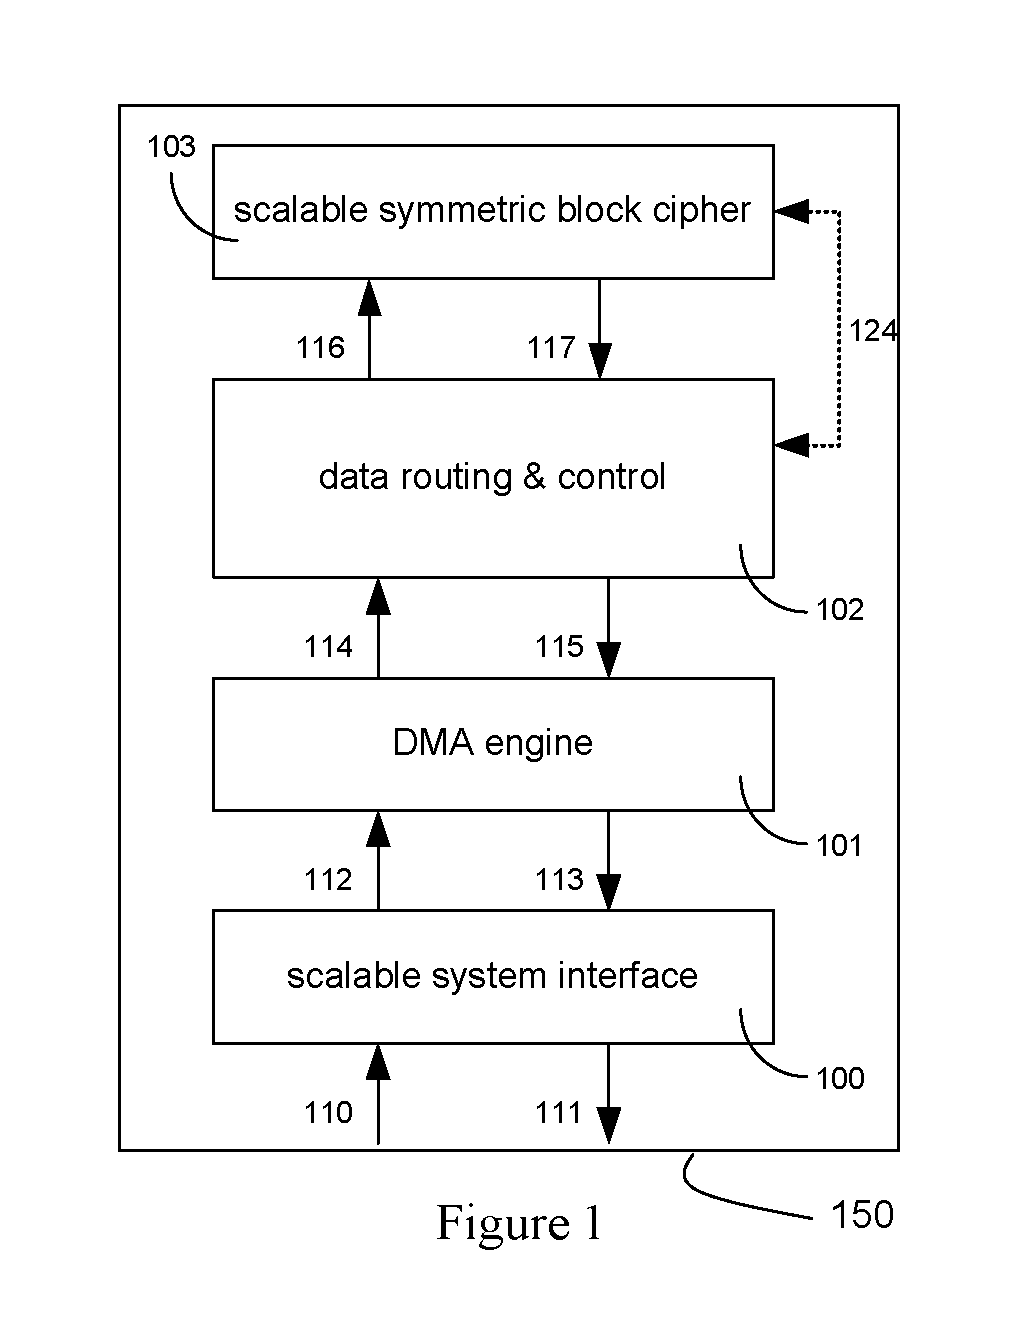 Method and apparatus for hardware-accelerated encryption/decryption